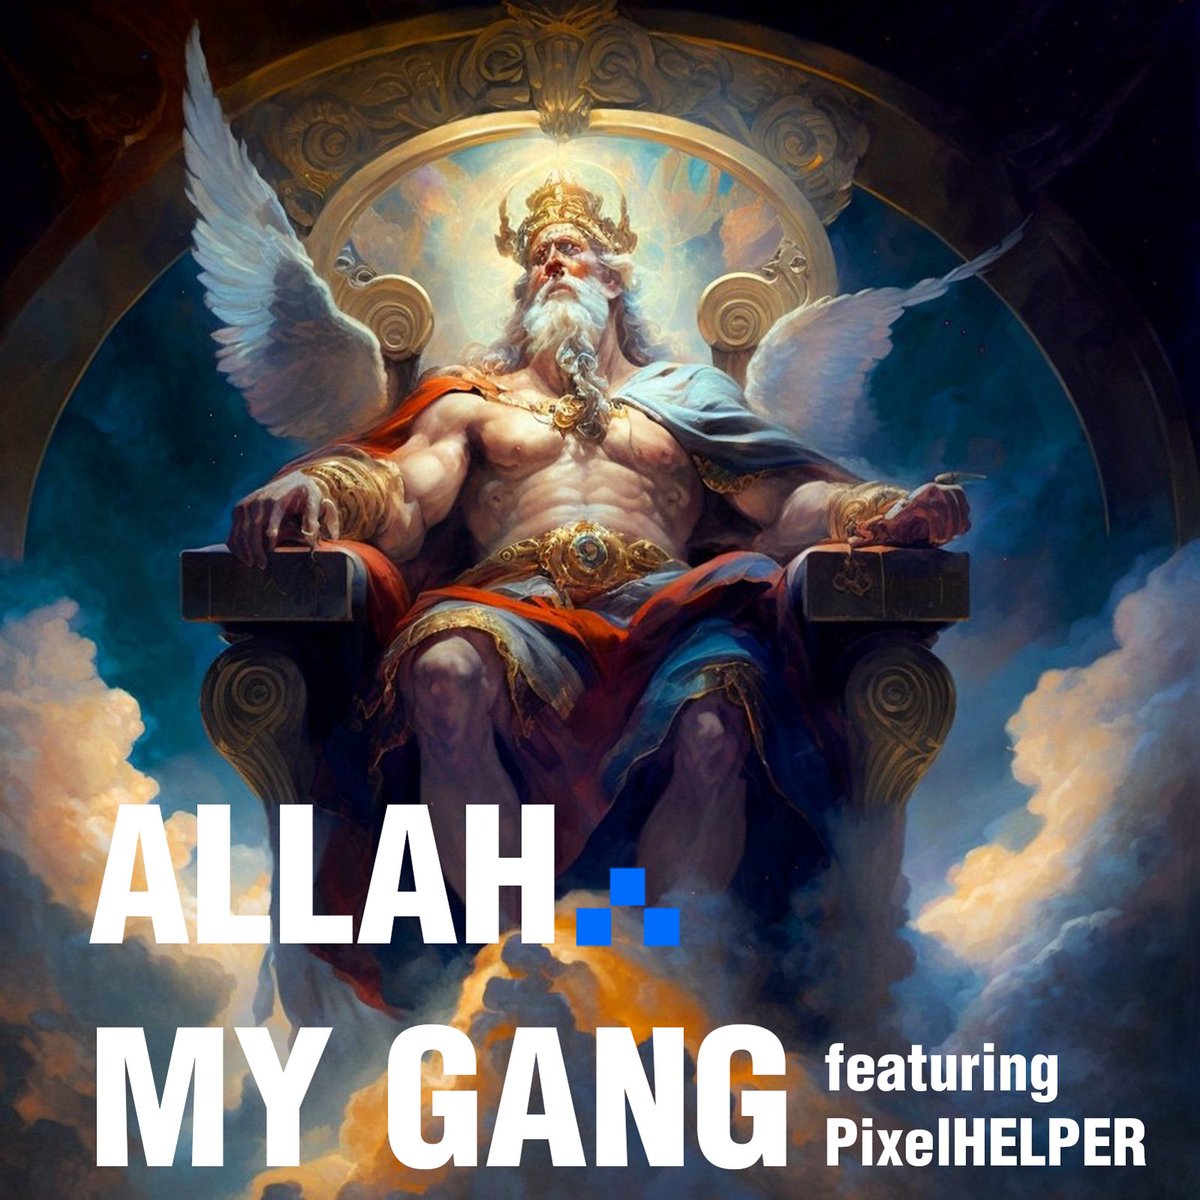 We're uploading our song to #Spotify & #AppleMusic right now. Follow @PixelHELPER on @Spotify & @AppleMusic more Informations about us on linktr.ee/PixelHELPER follow the reformation of islam. The liberal rainbow islam is the only modern islamic teaching. ->@HolyKaaba_LGBT🕋🌈